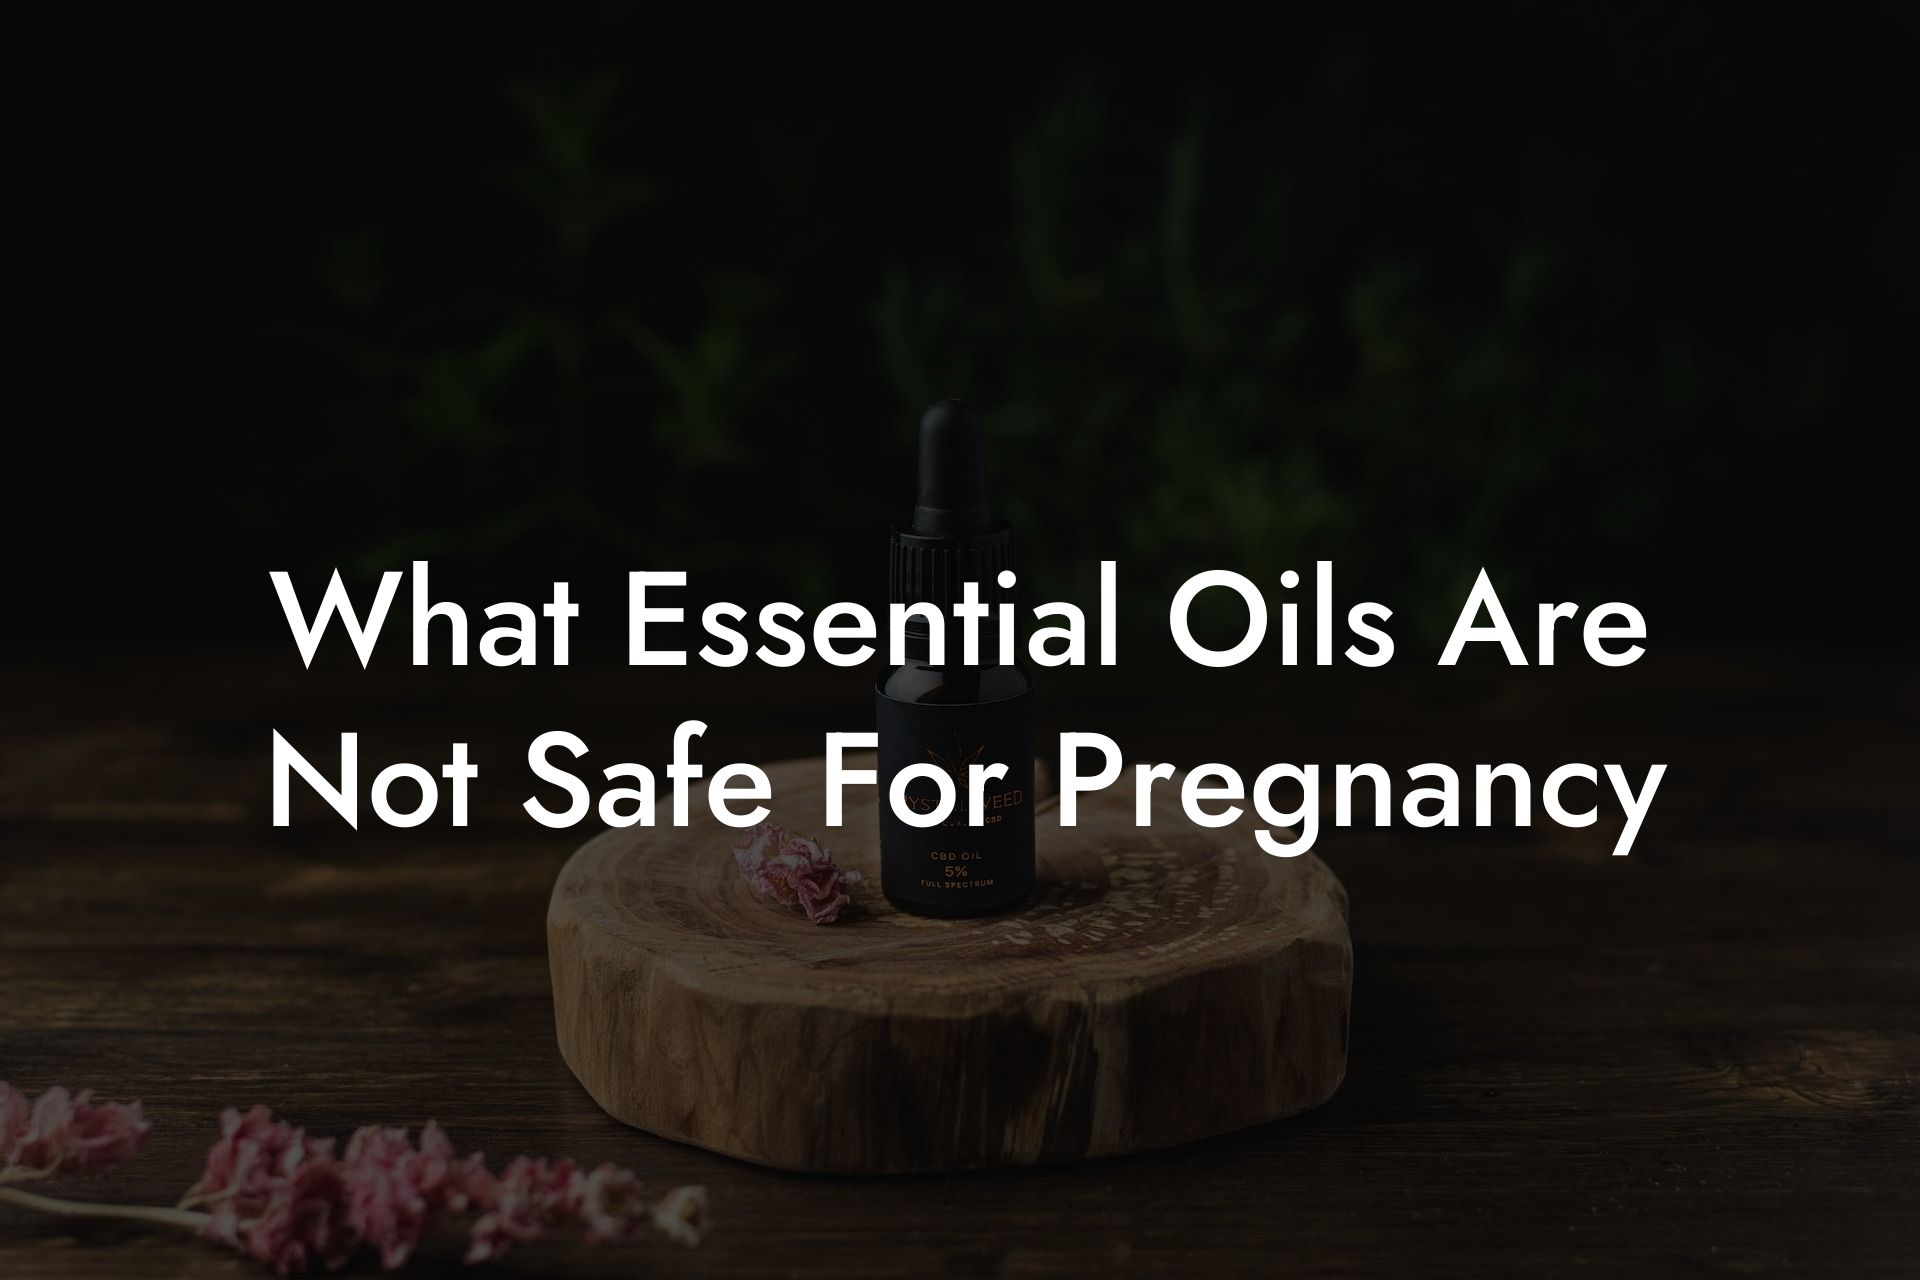 What Essential Oils Are Not Safe For Pregnancy